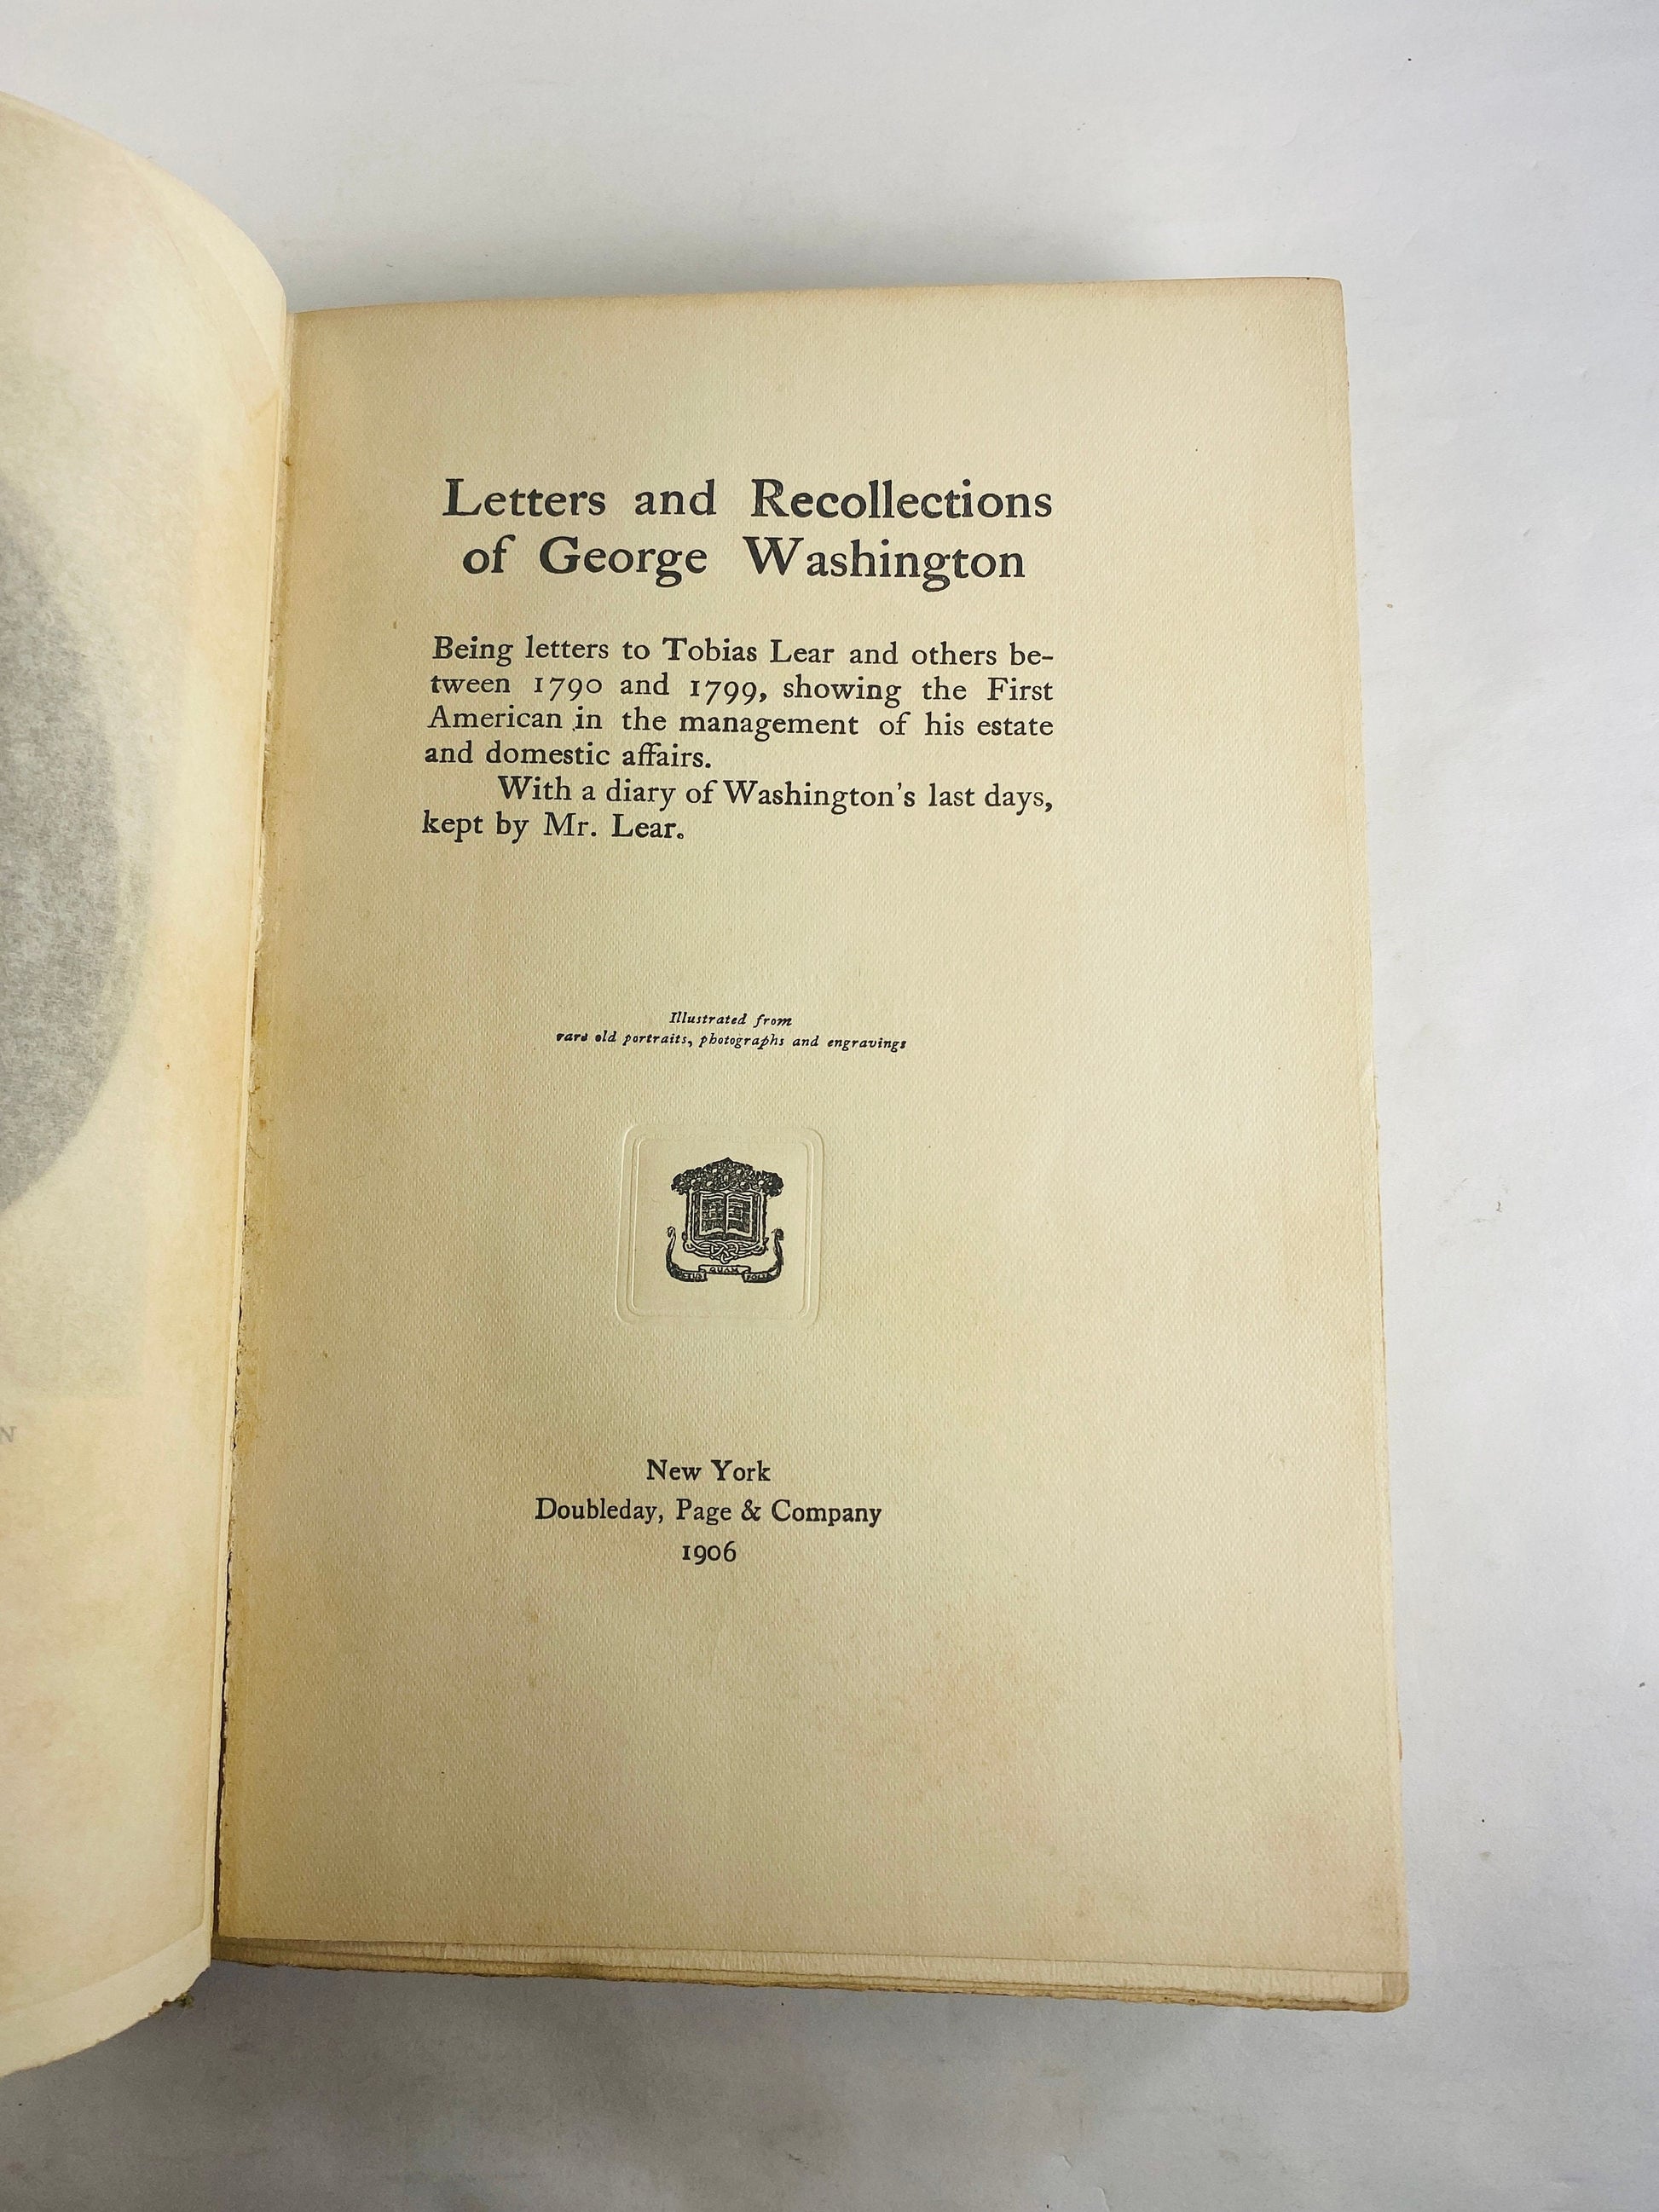 George Washington Letters and Recollections FIRST EDITION vintage book circa 1906 Tobias Lear letters from 1770-1799 diary. Bixby